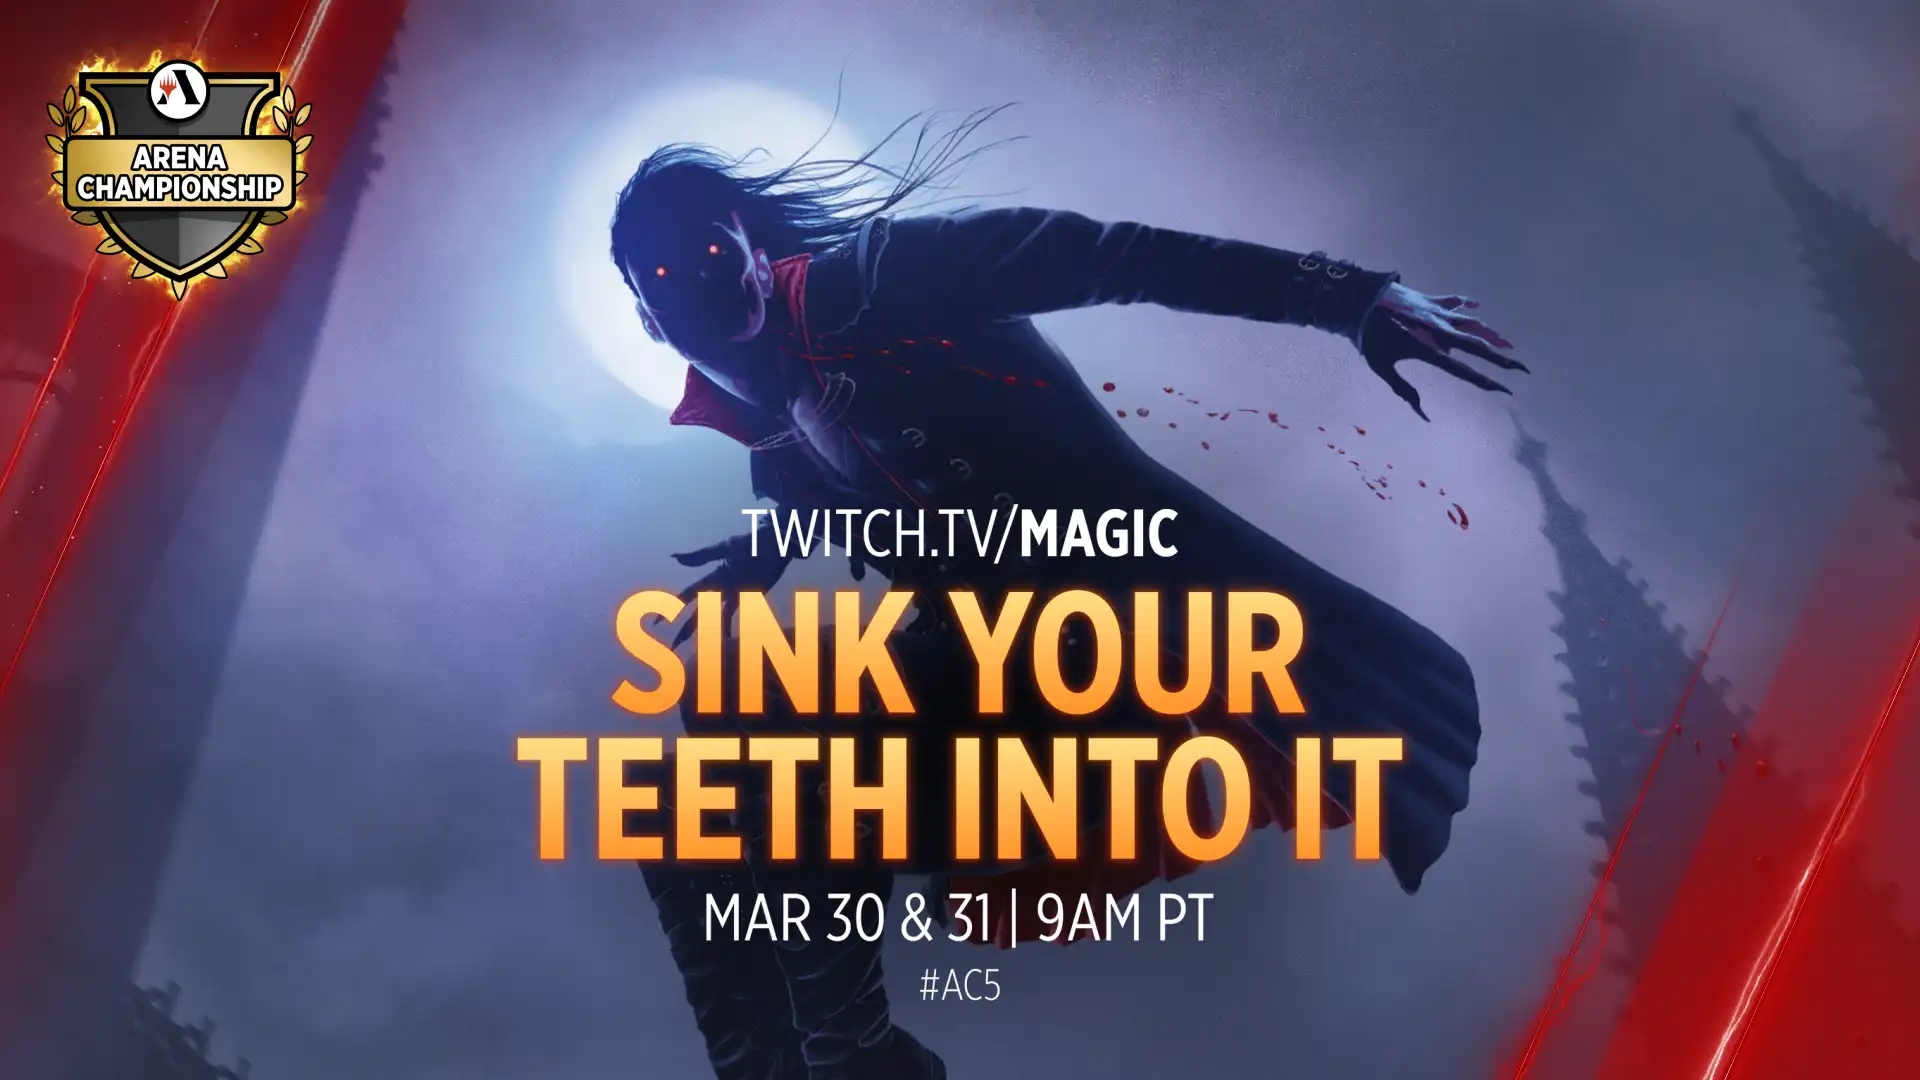 A shadowed, leaping vampire against the moon and the Arena Championship shield logo in the upper left corner, with the text Twitch.tv/Magic Sink Your Teeth into It, March 30 and 31, 9 a.m. PT #AC5